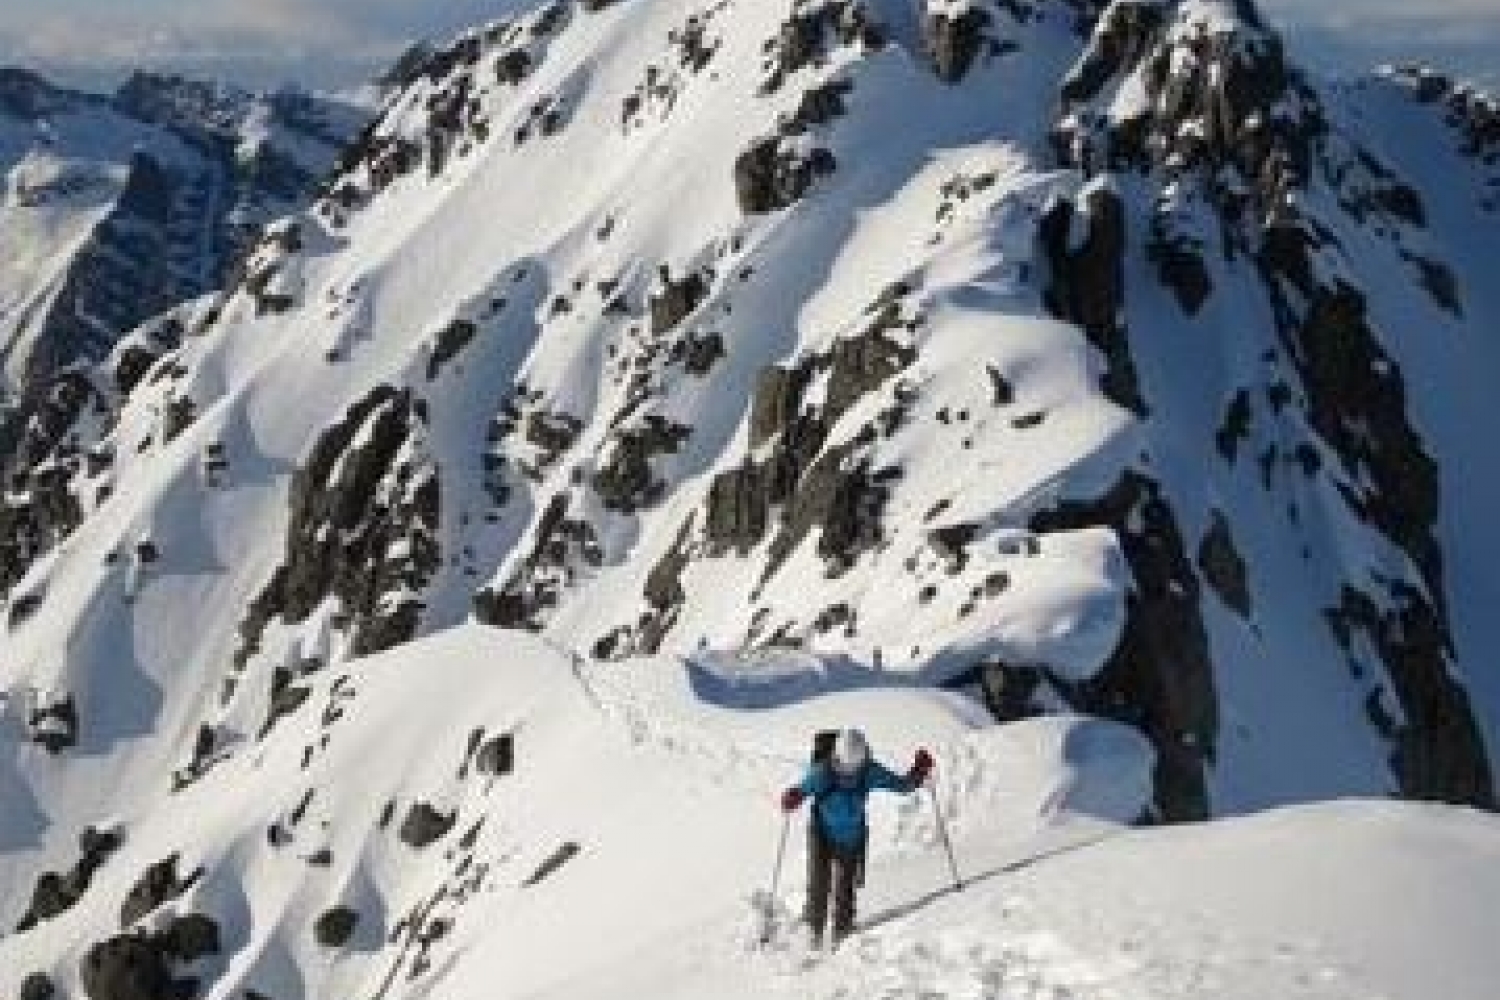 01. How to book Ski Touring Package?